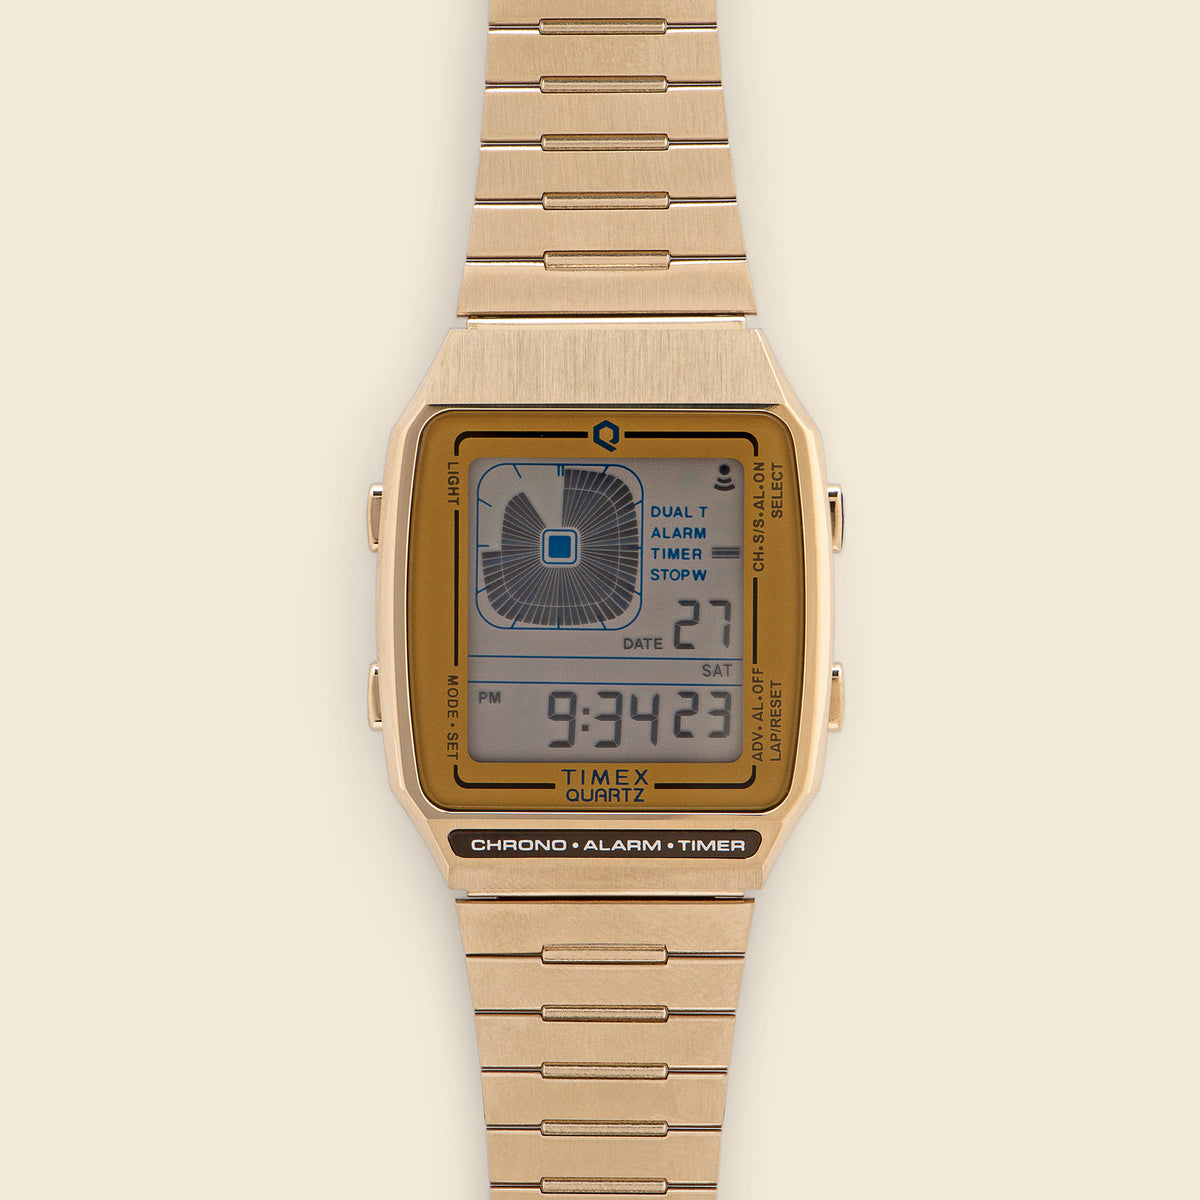 Q Digital LCA Stainless Steel Watch  - Gold Tone